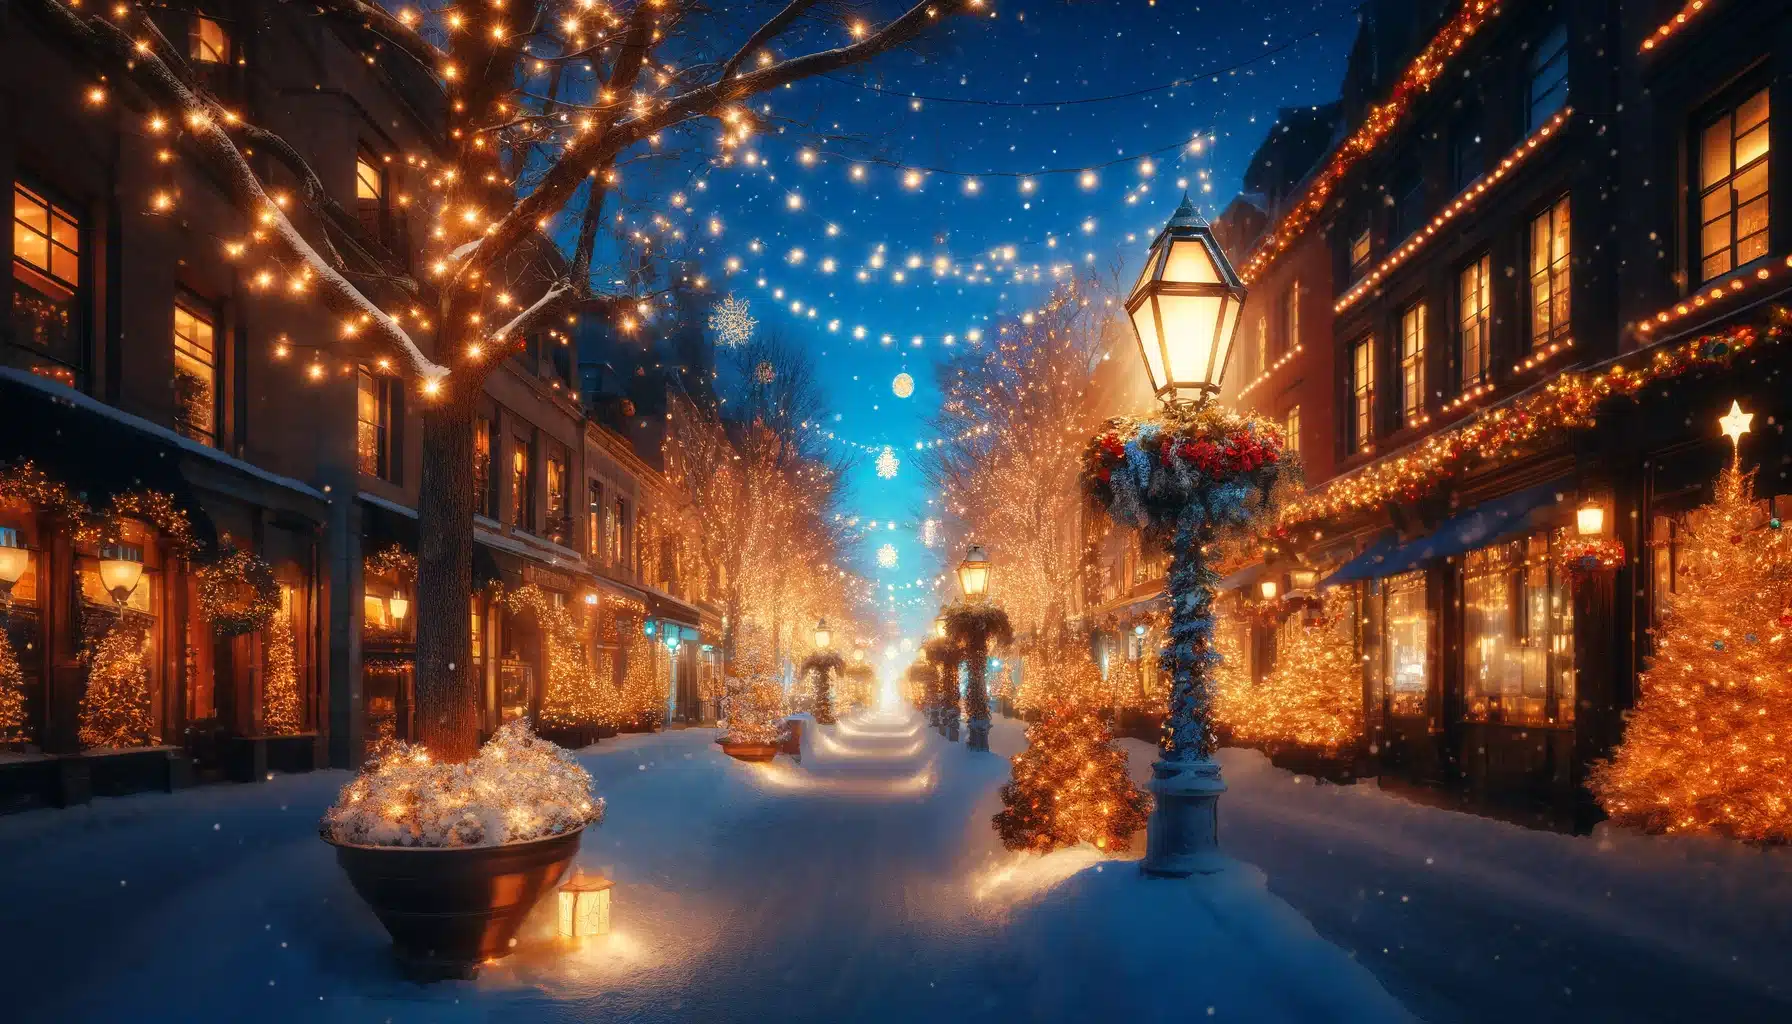 Cozy urban street decorated with warm glowing Christmas lights during the blue hour, with snow-dusted trees and lampposts.